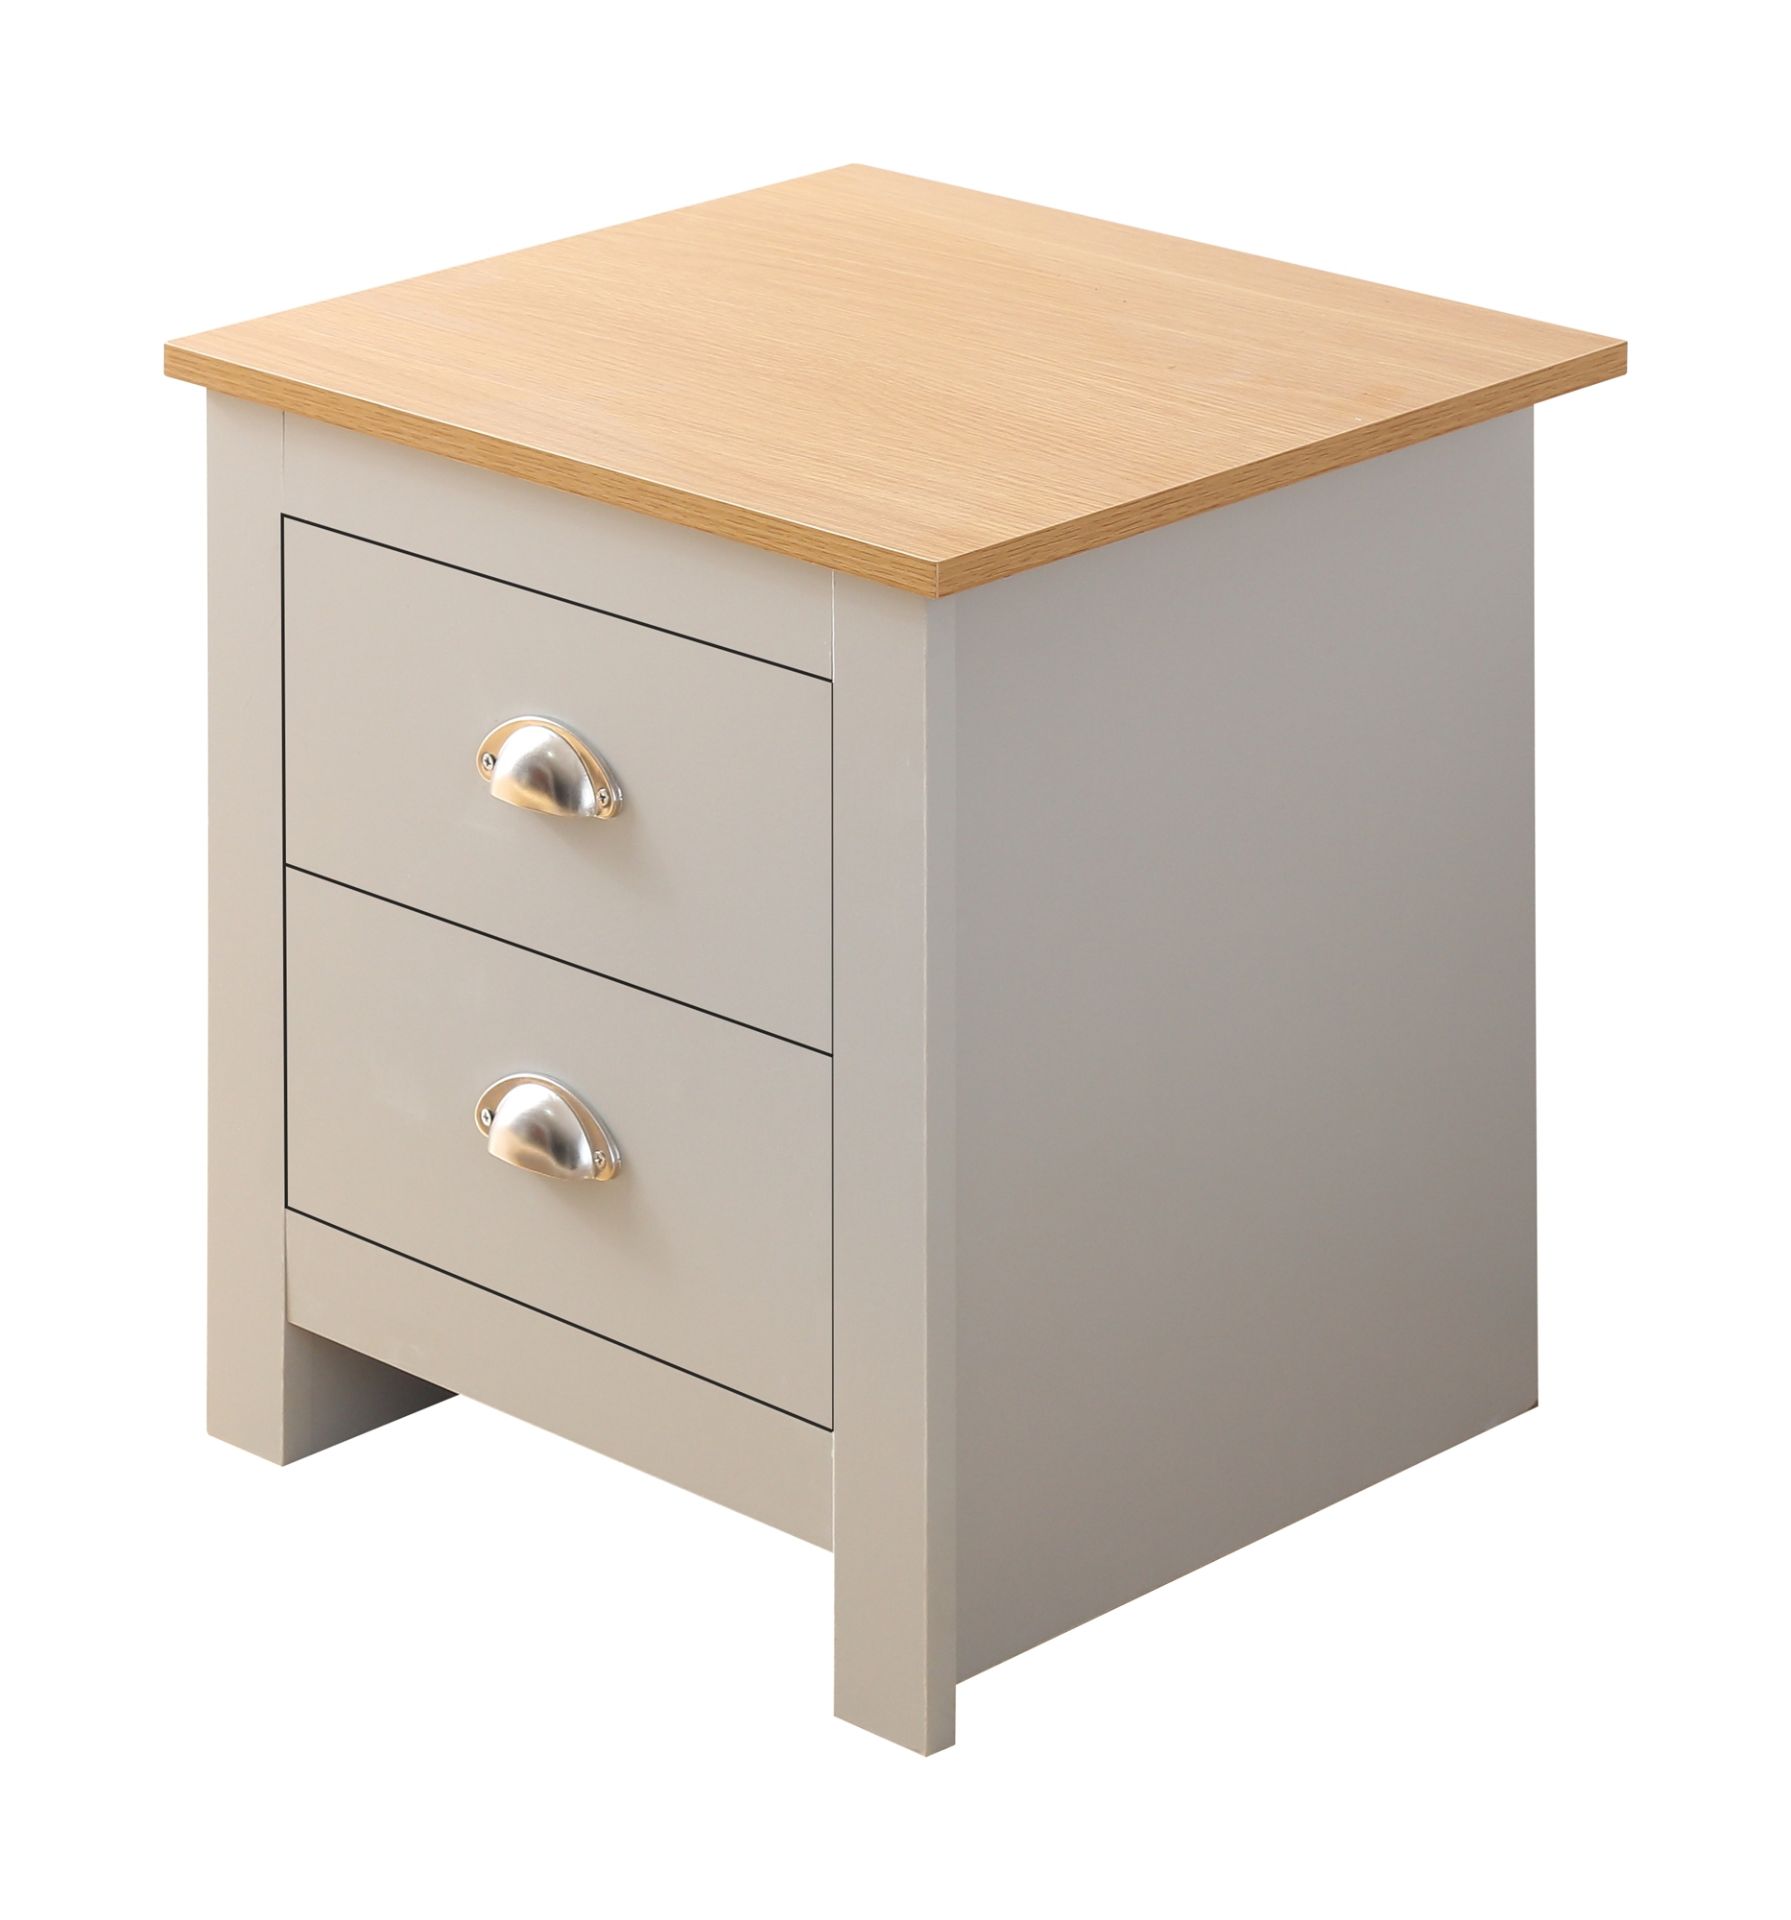 2 X BRAND NEW FLAT PACKED GREY WITH OAK TOP SHAKER-INSPIRED STYLISH DESIGN BEDSIDES - Image 3 of 4